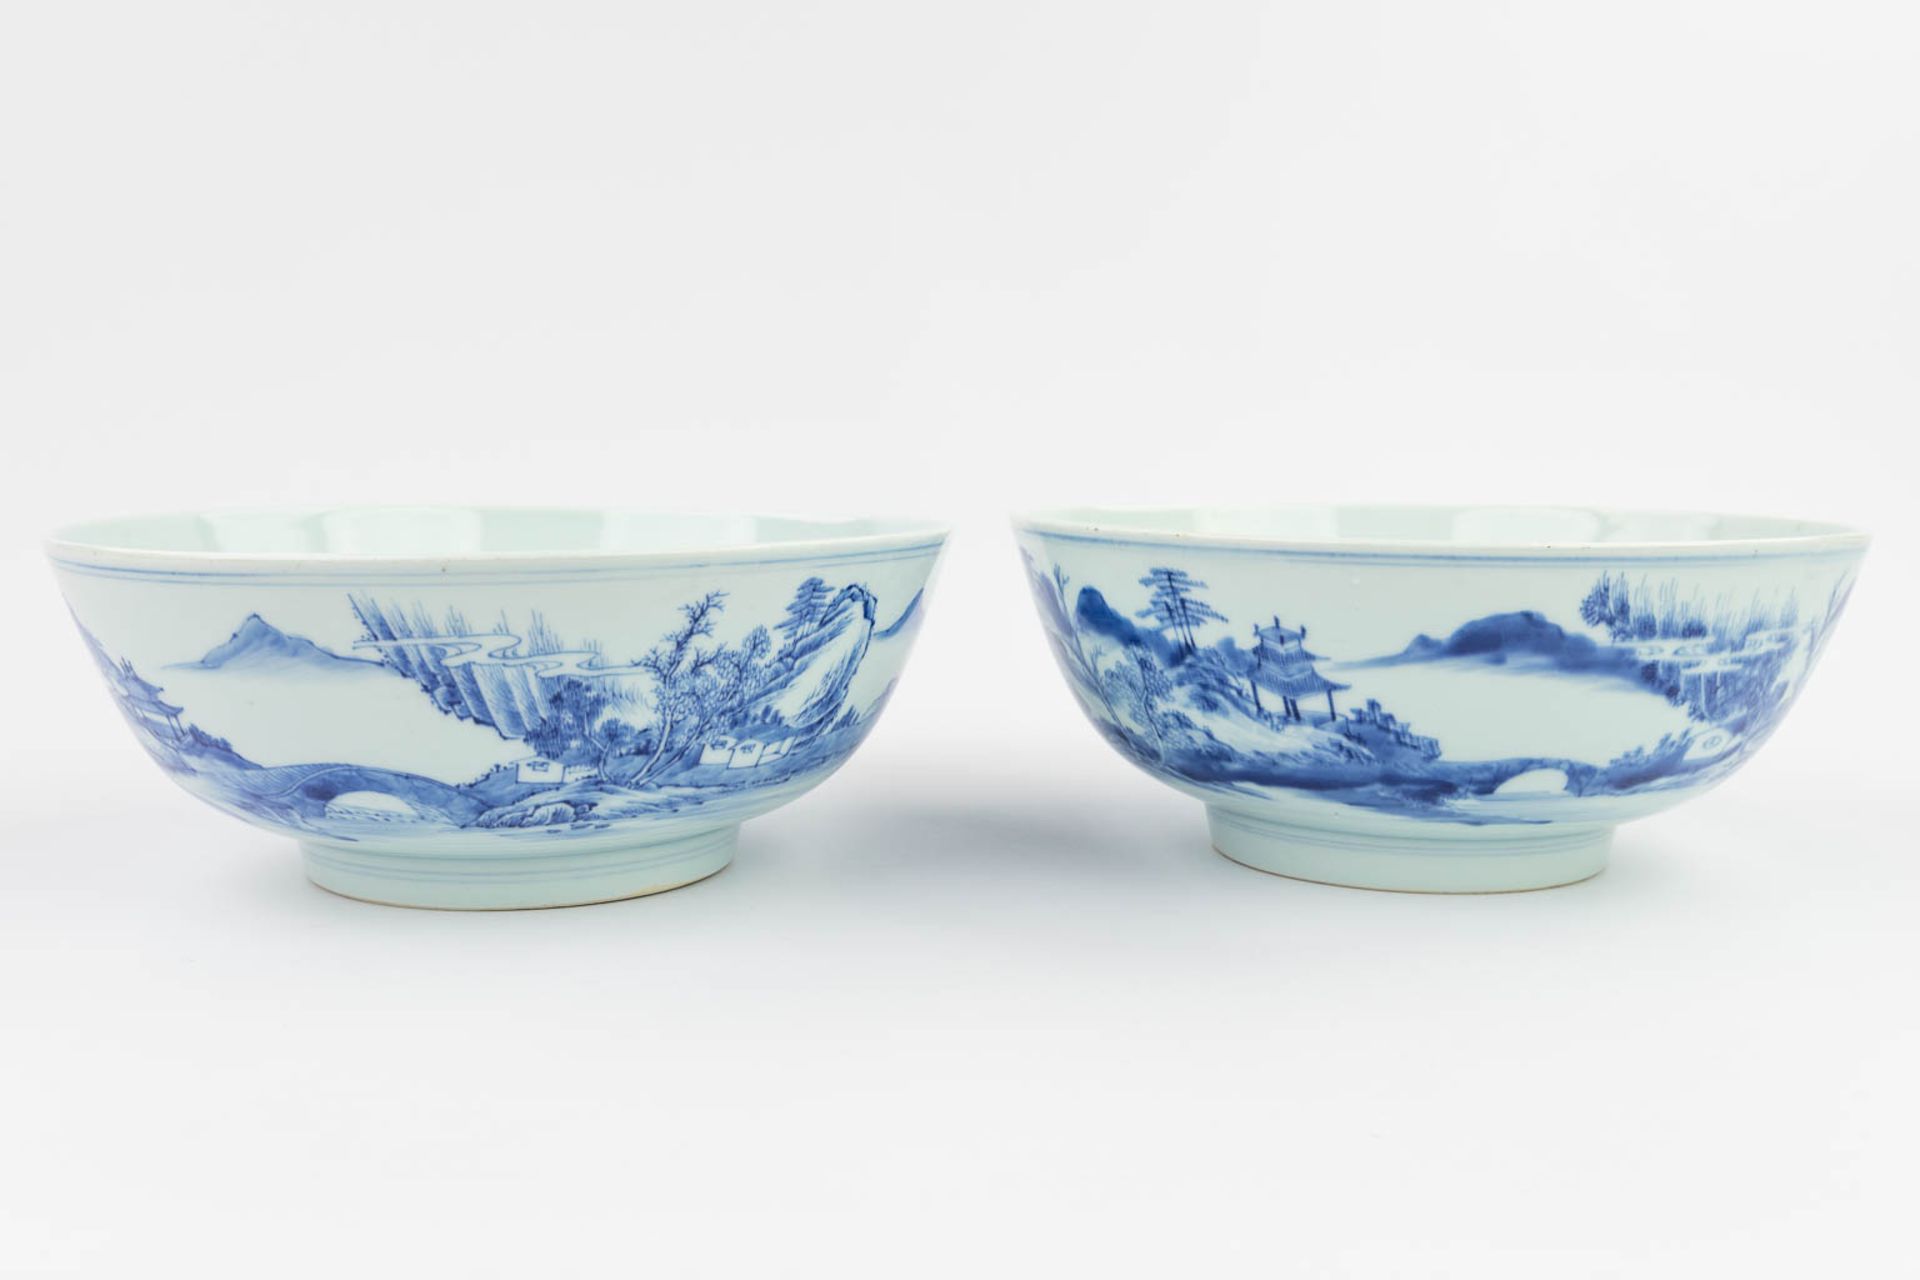 A pair of Chinese bowls made of blue-white porcelain. 18th/19th century. (H: 11 x D: 26,5 cm) - Image 6 of 17